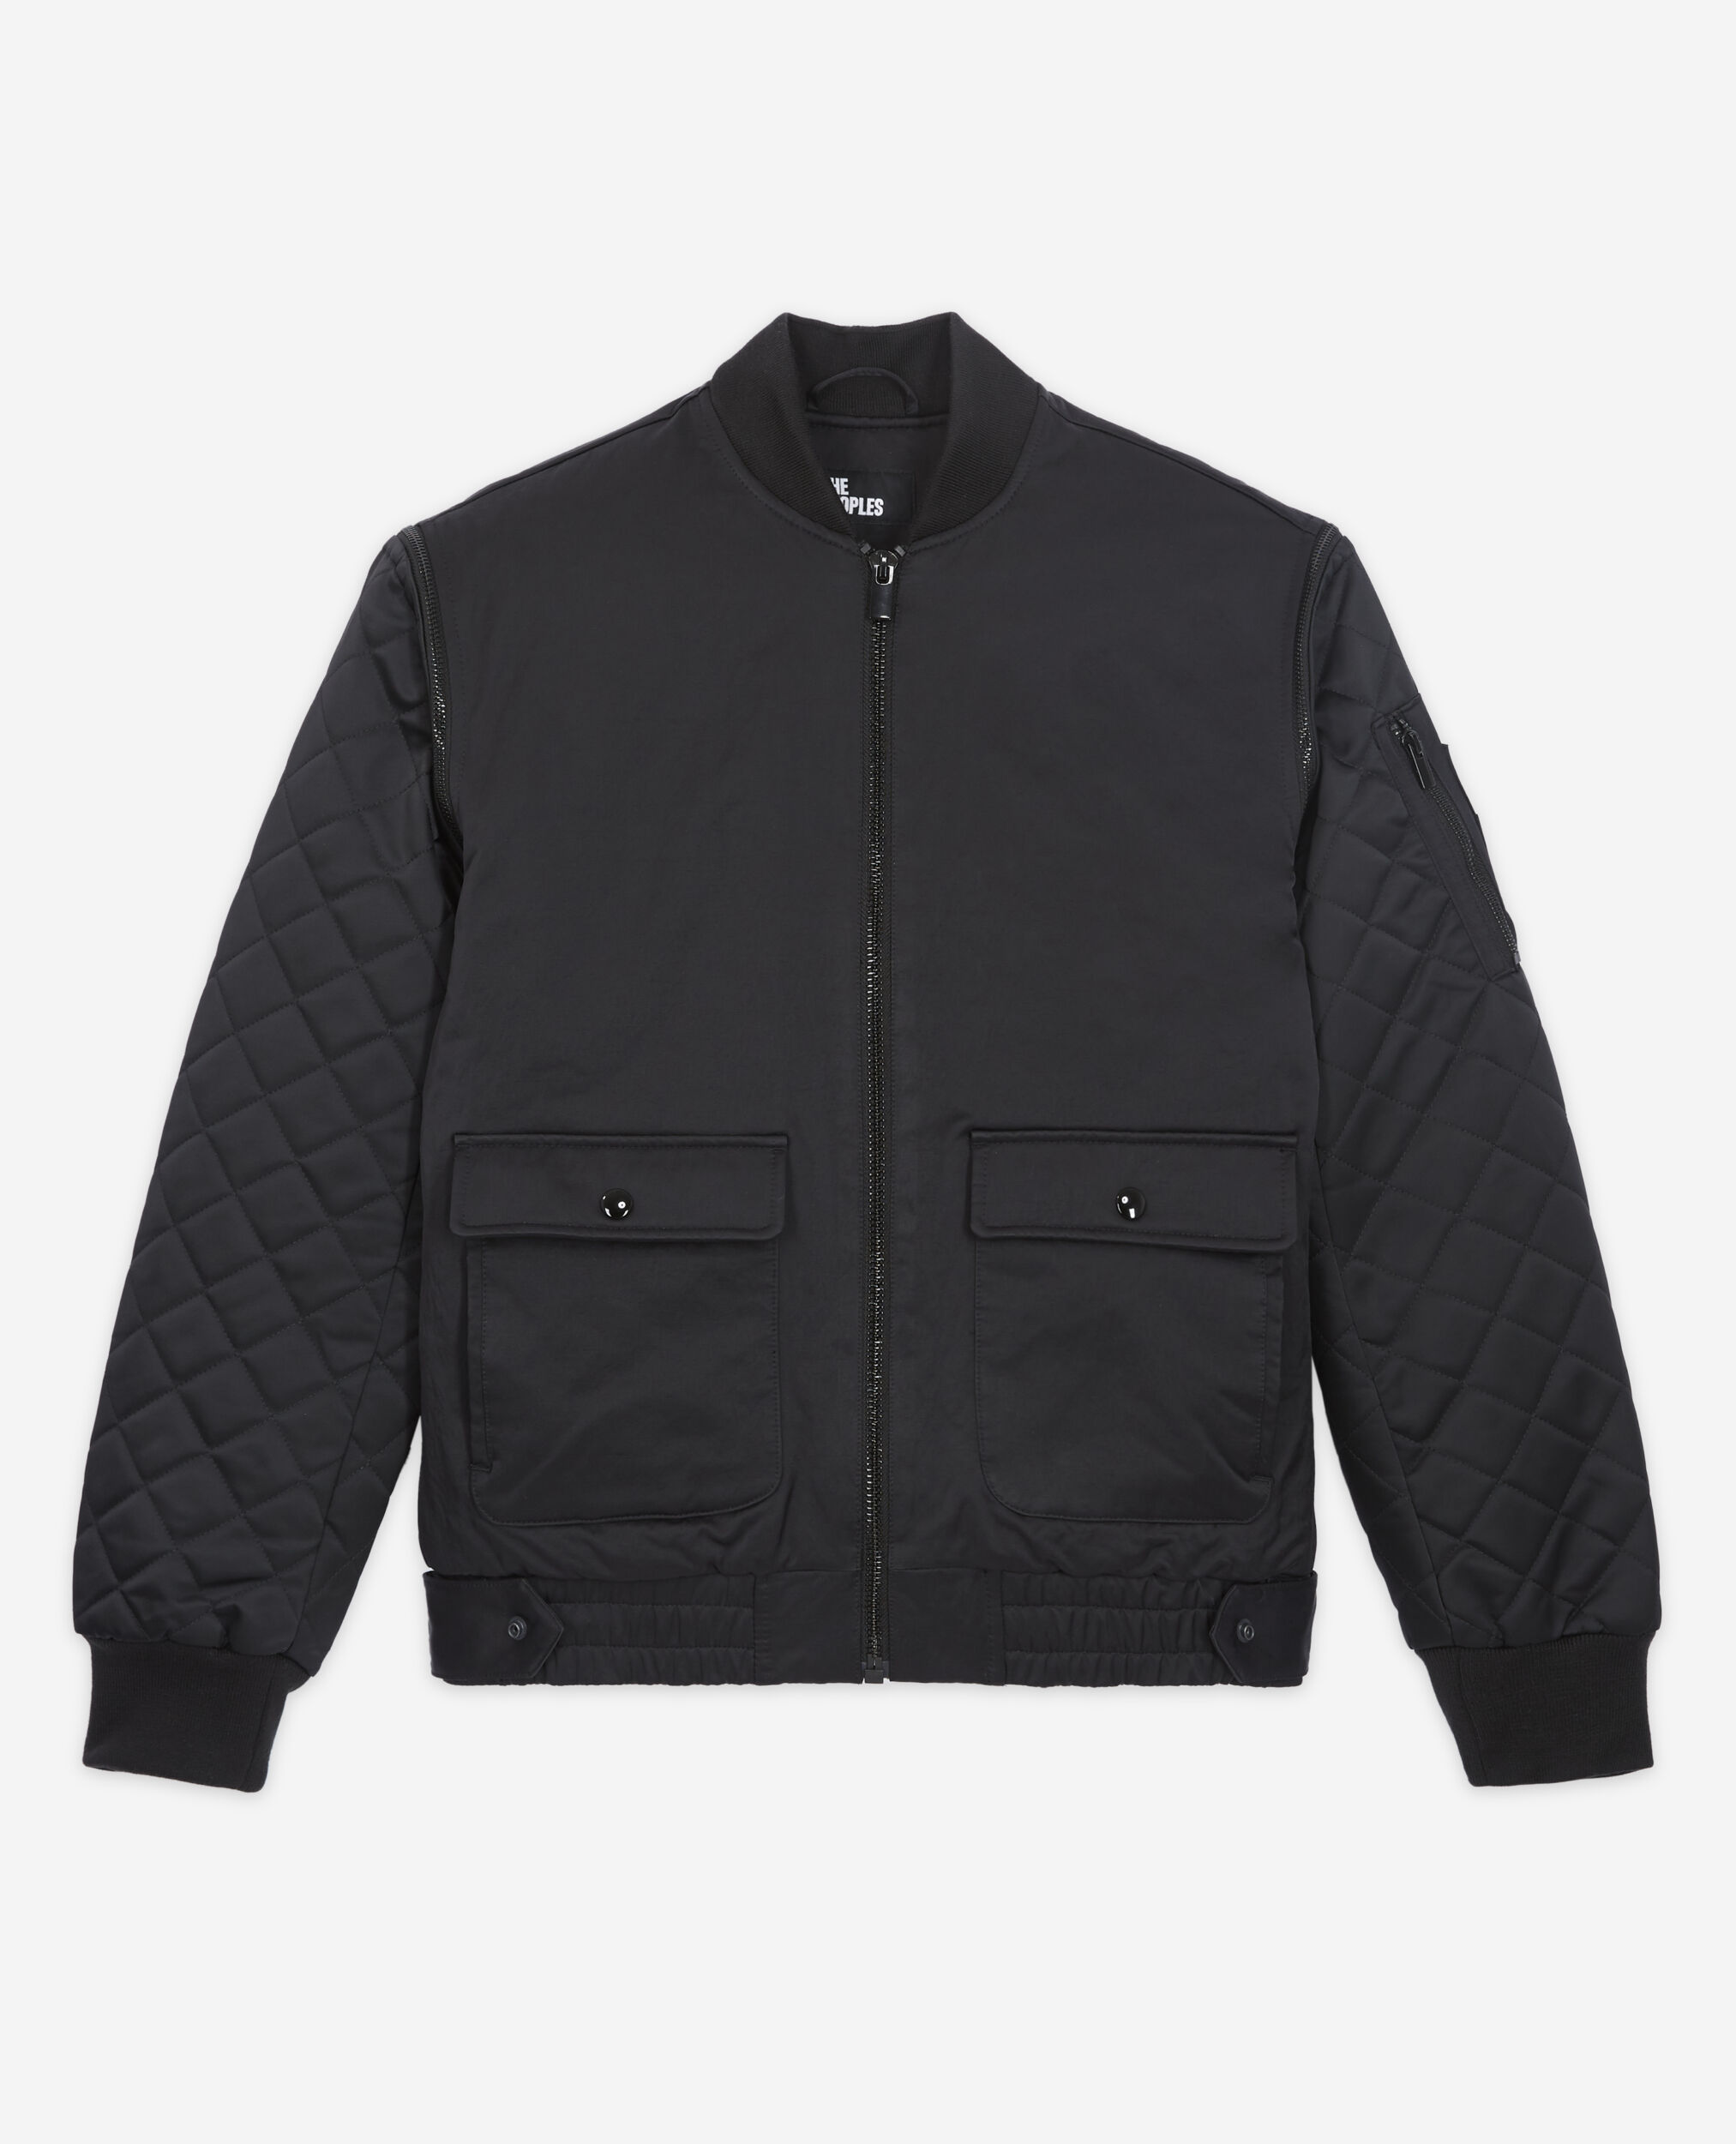 Bombers manches amovibles noir, BLACK, hi-res image number null